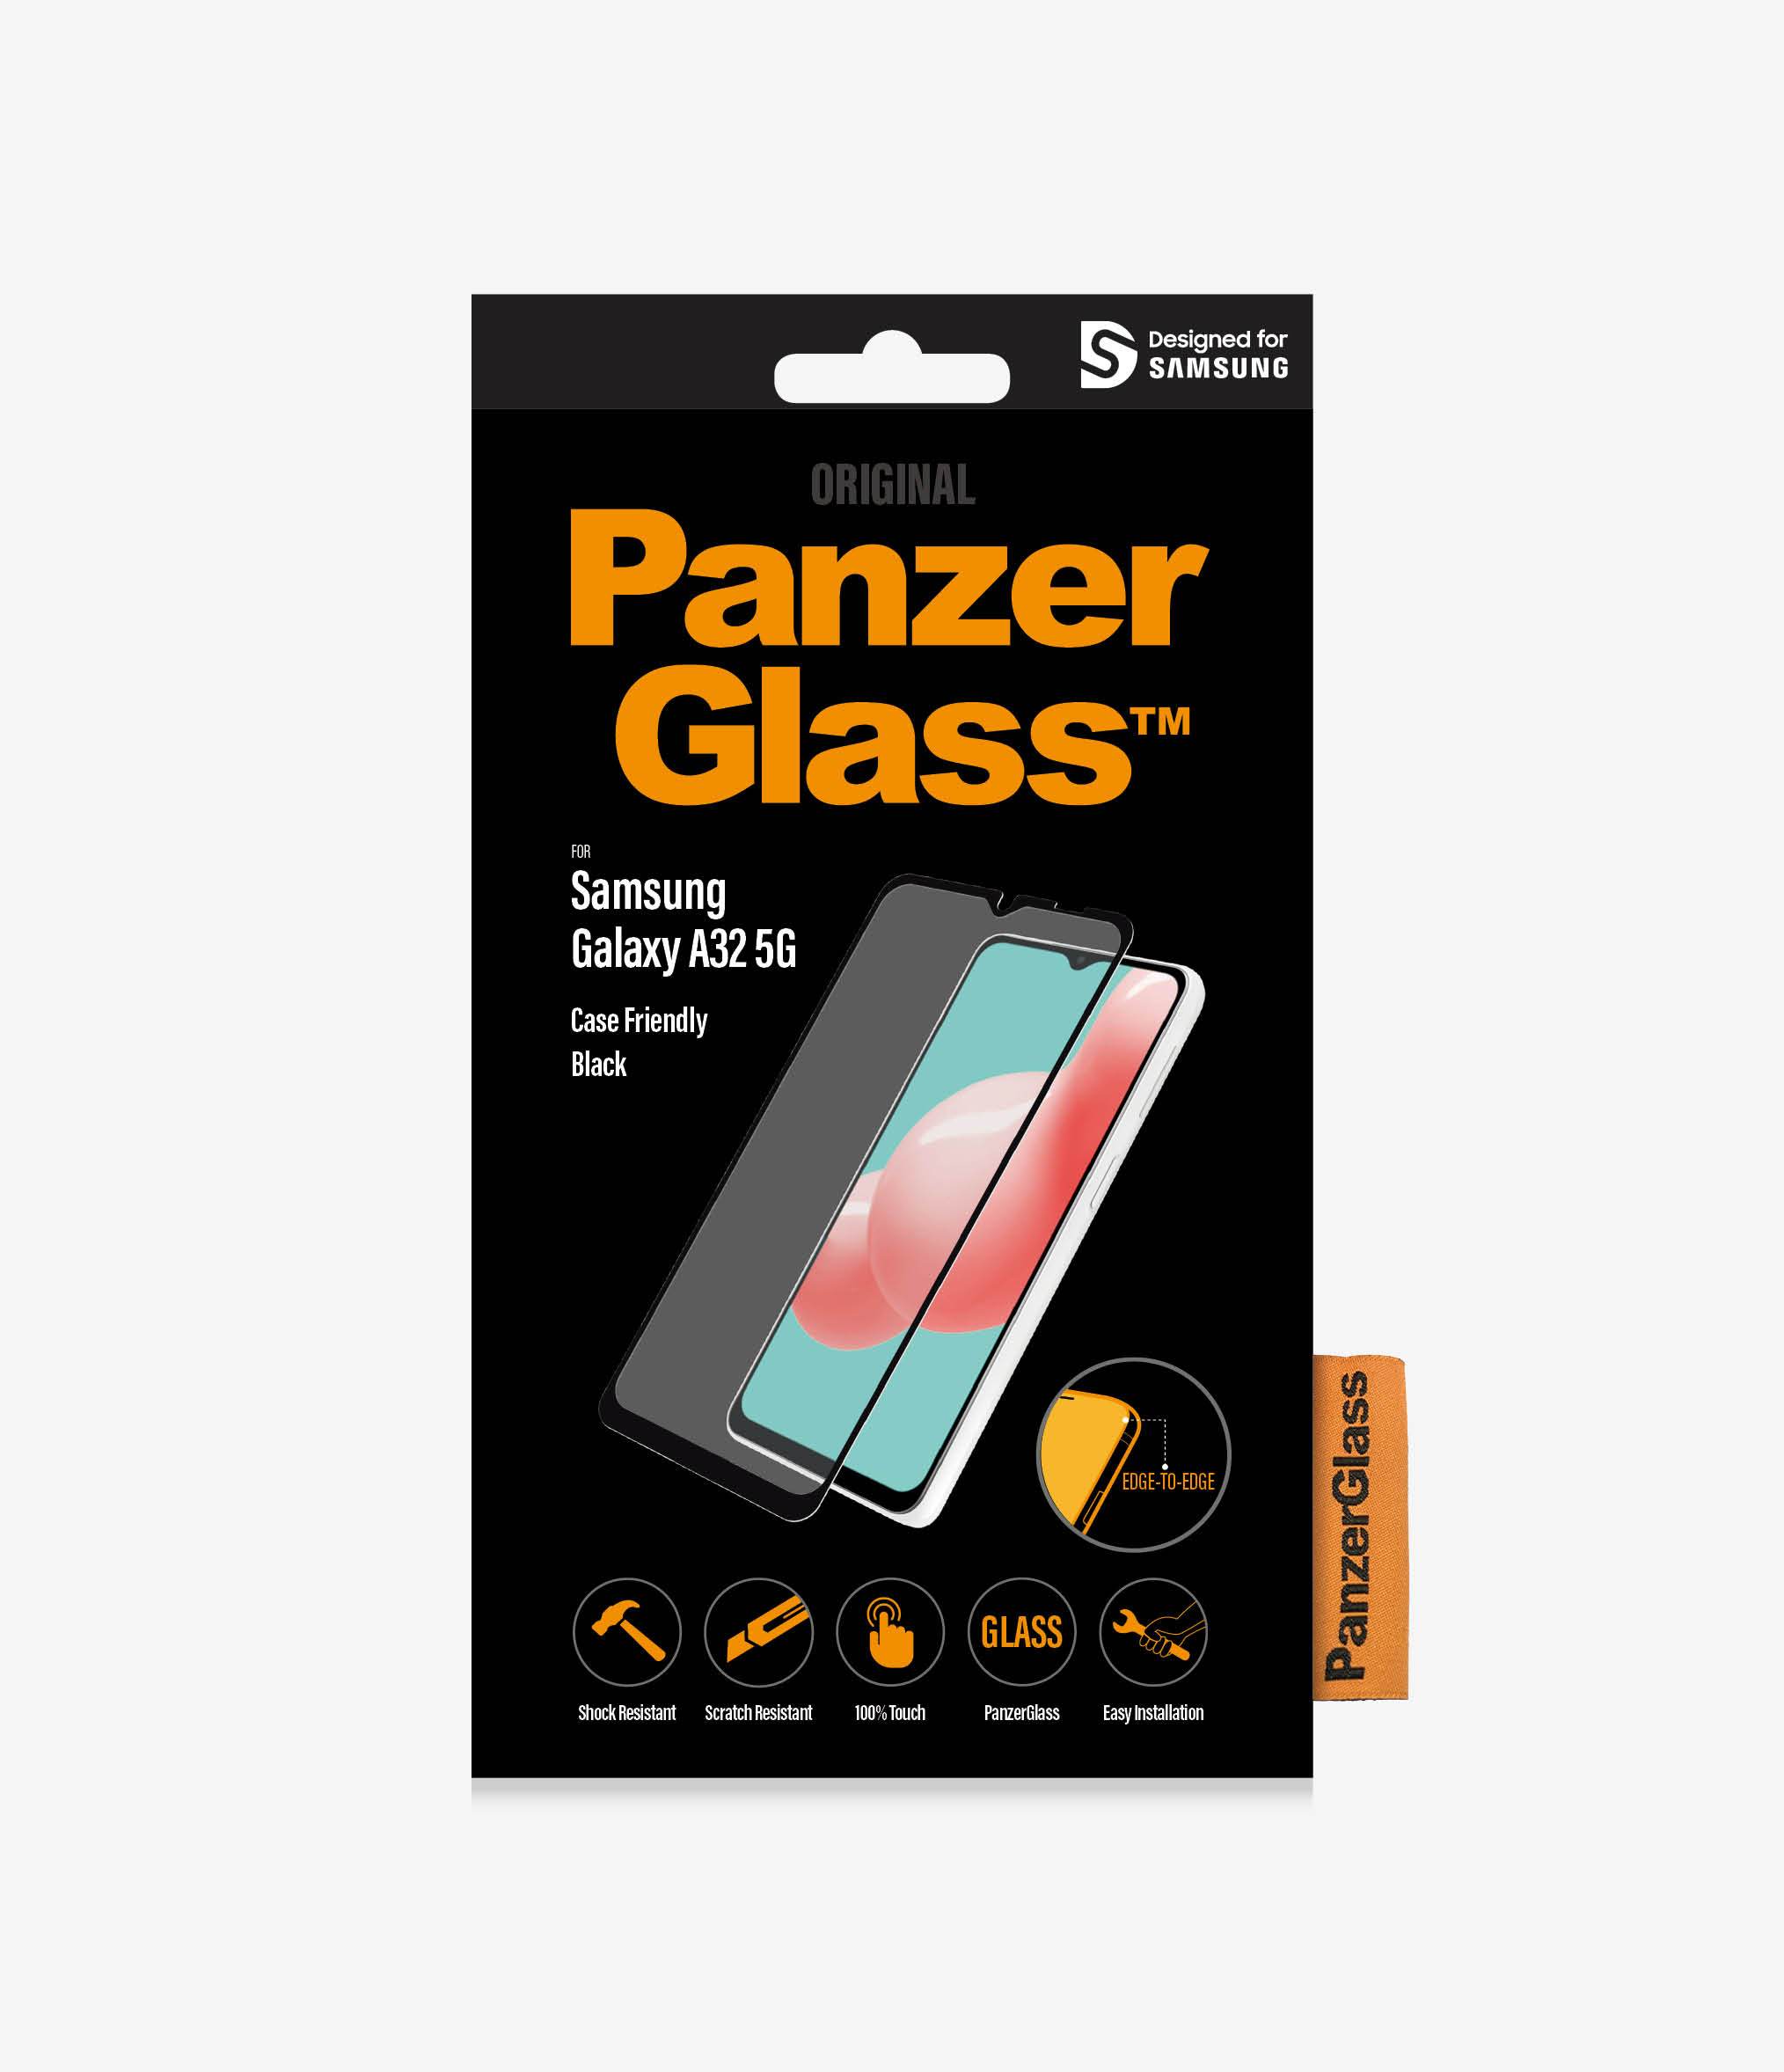 PanzerGlass™ Samsung Galaxy A32 5G - Black (7252) - Screen Protector - Full Frame Coverage, Rounded Edges, Crystal Clear, 100% touch preservation